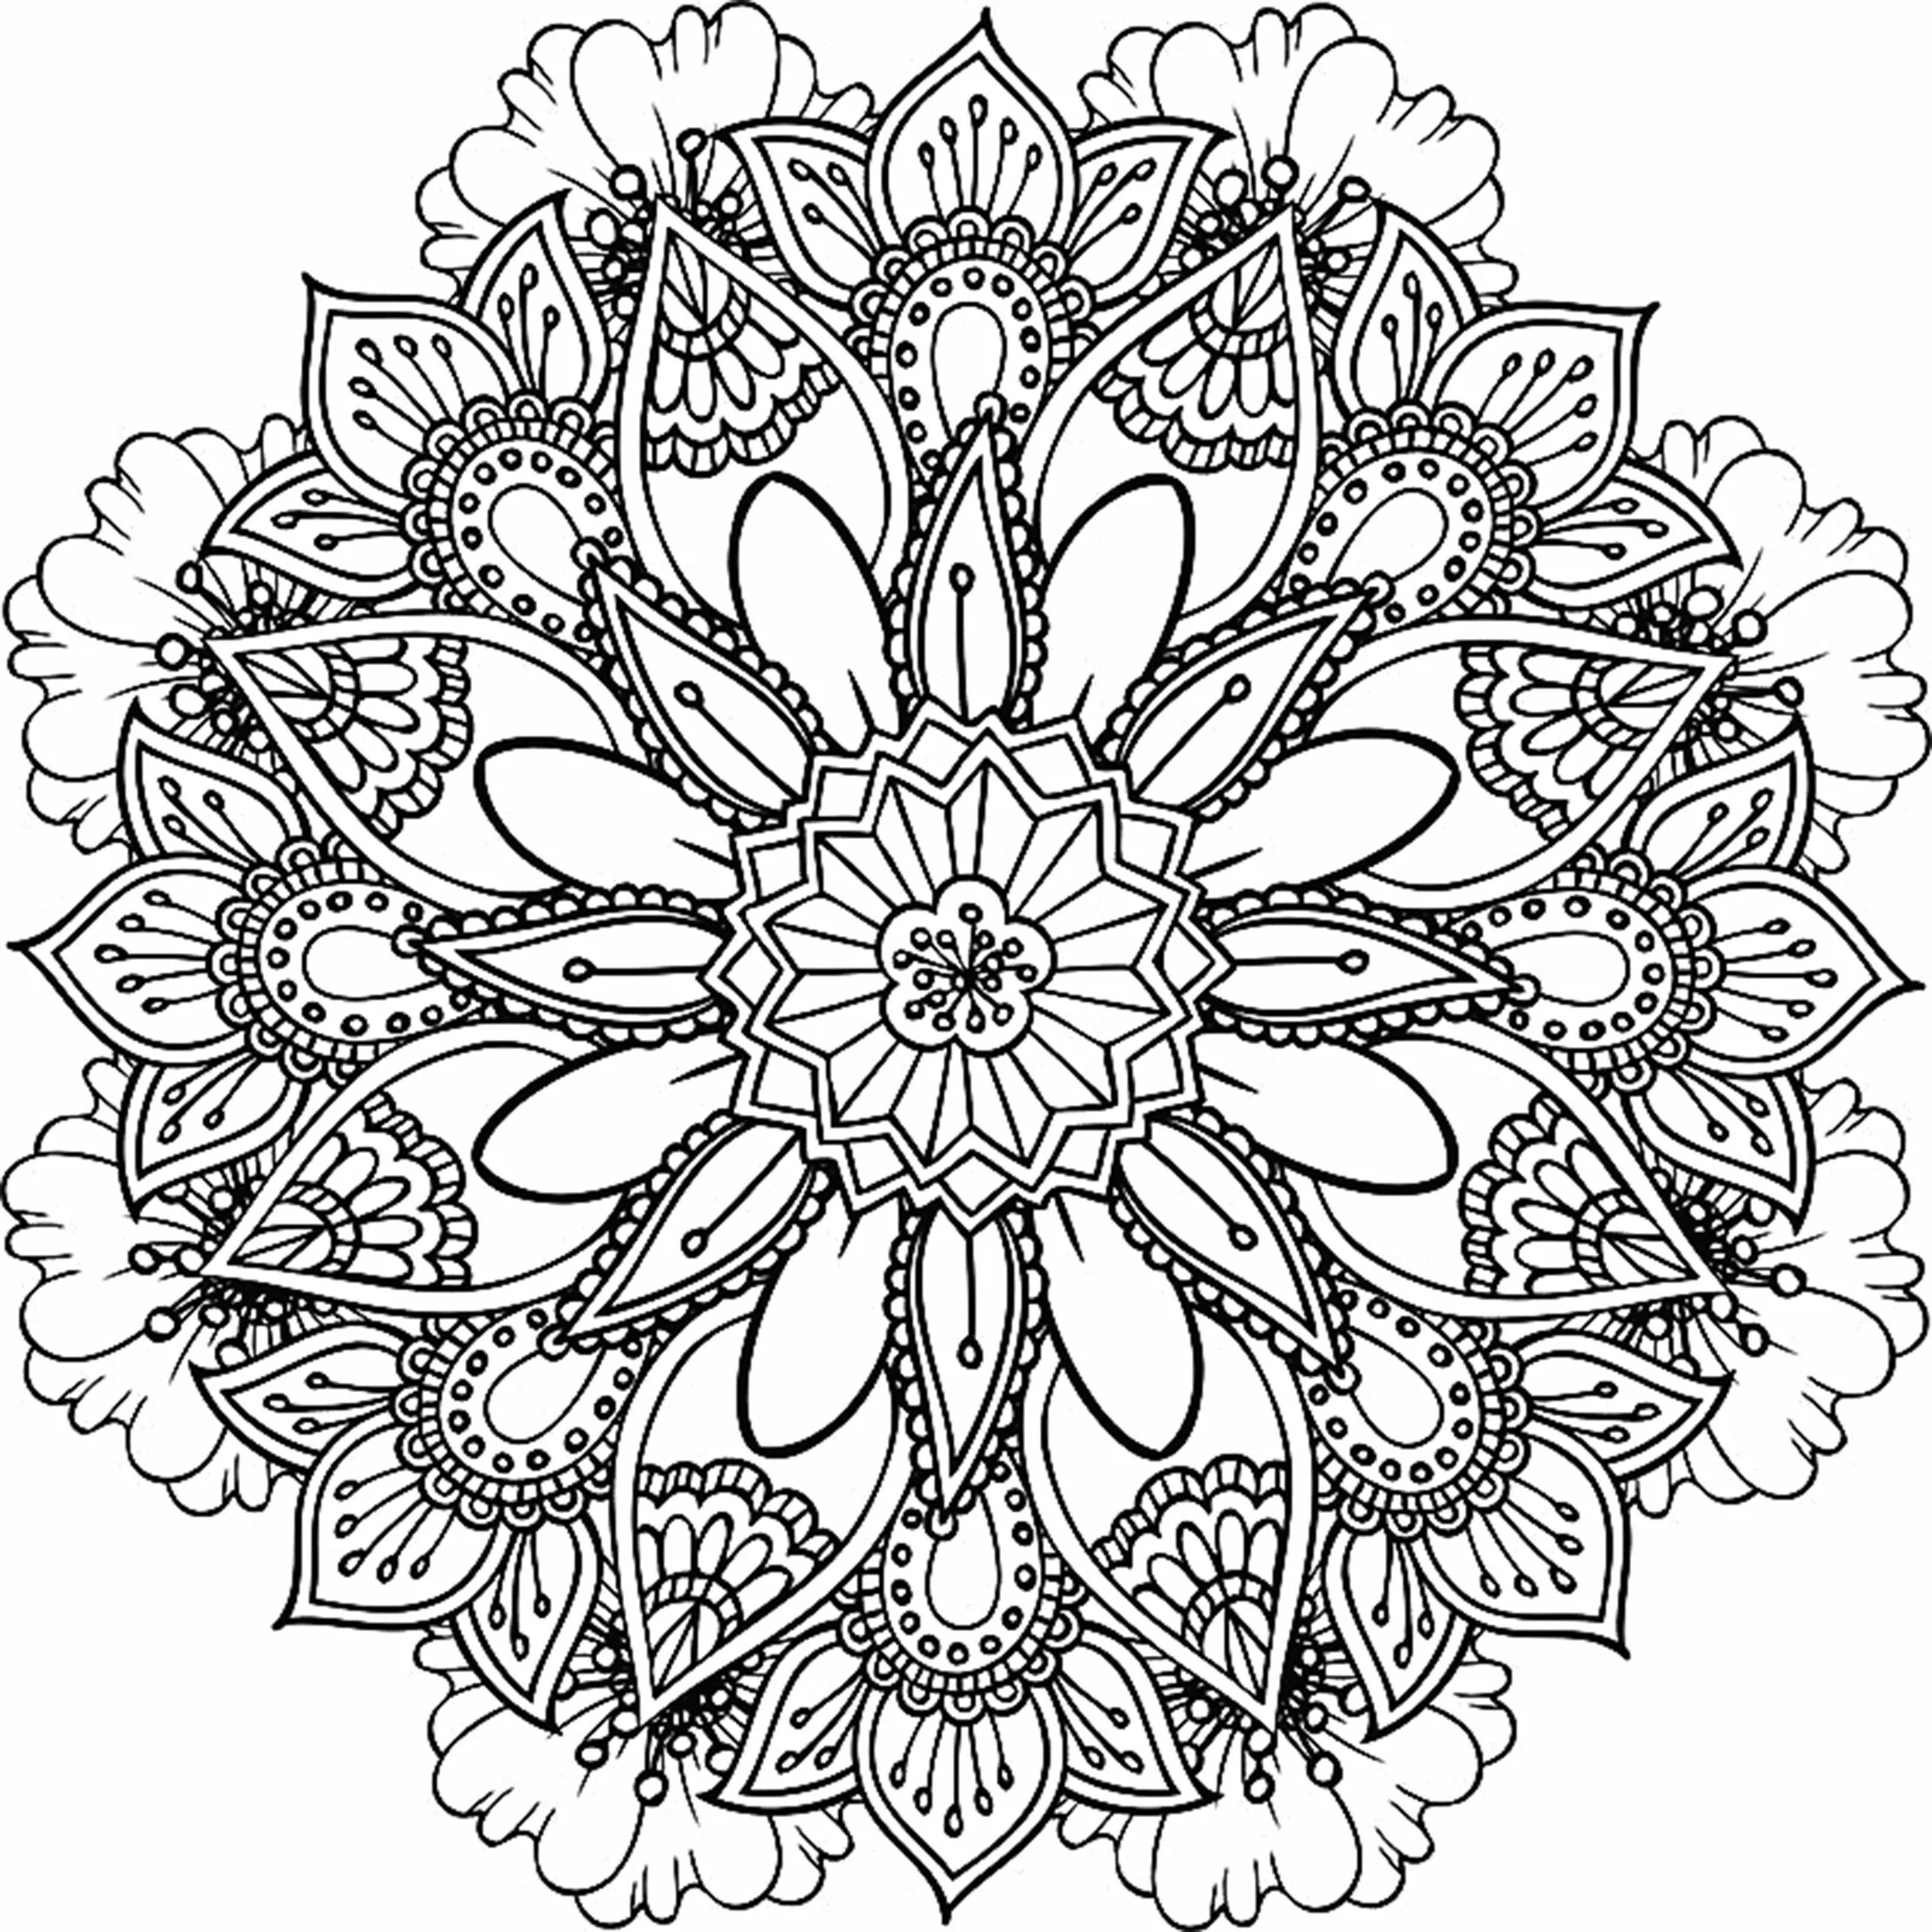 Exalted coloring page взрослая мандала